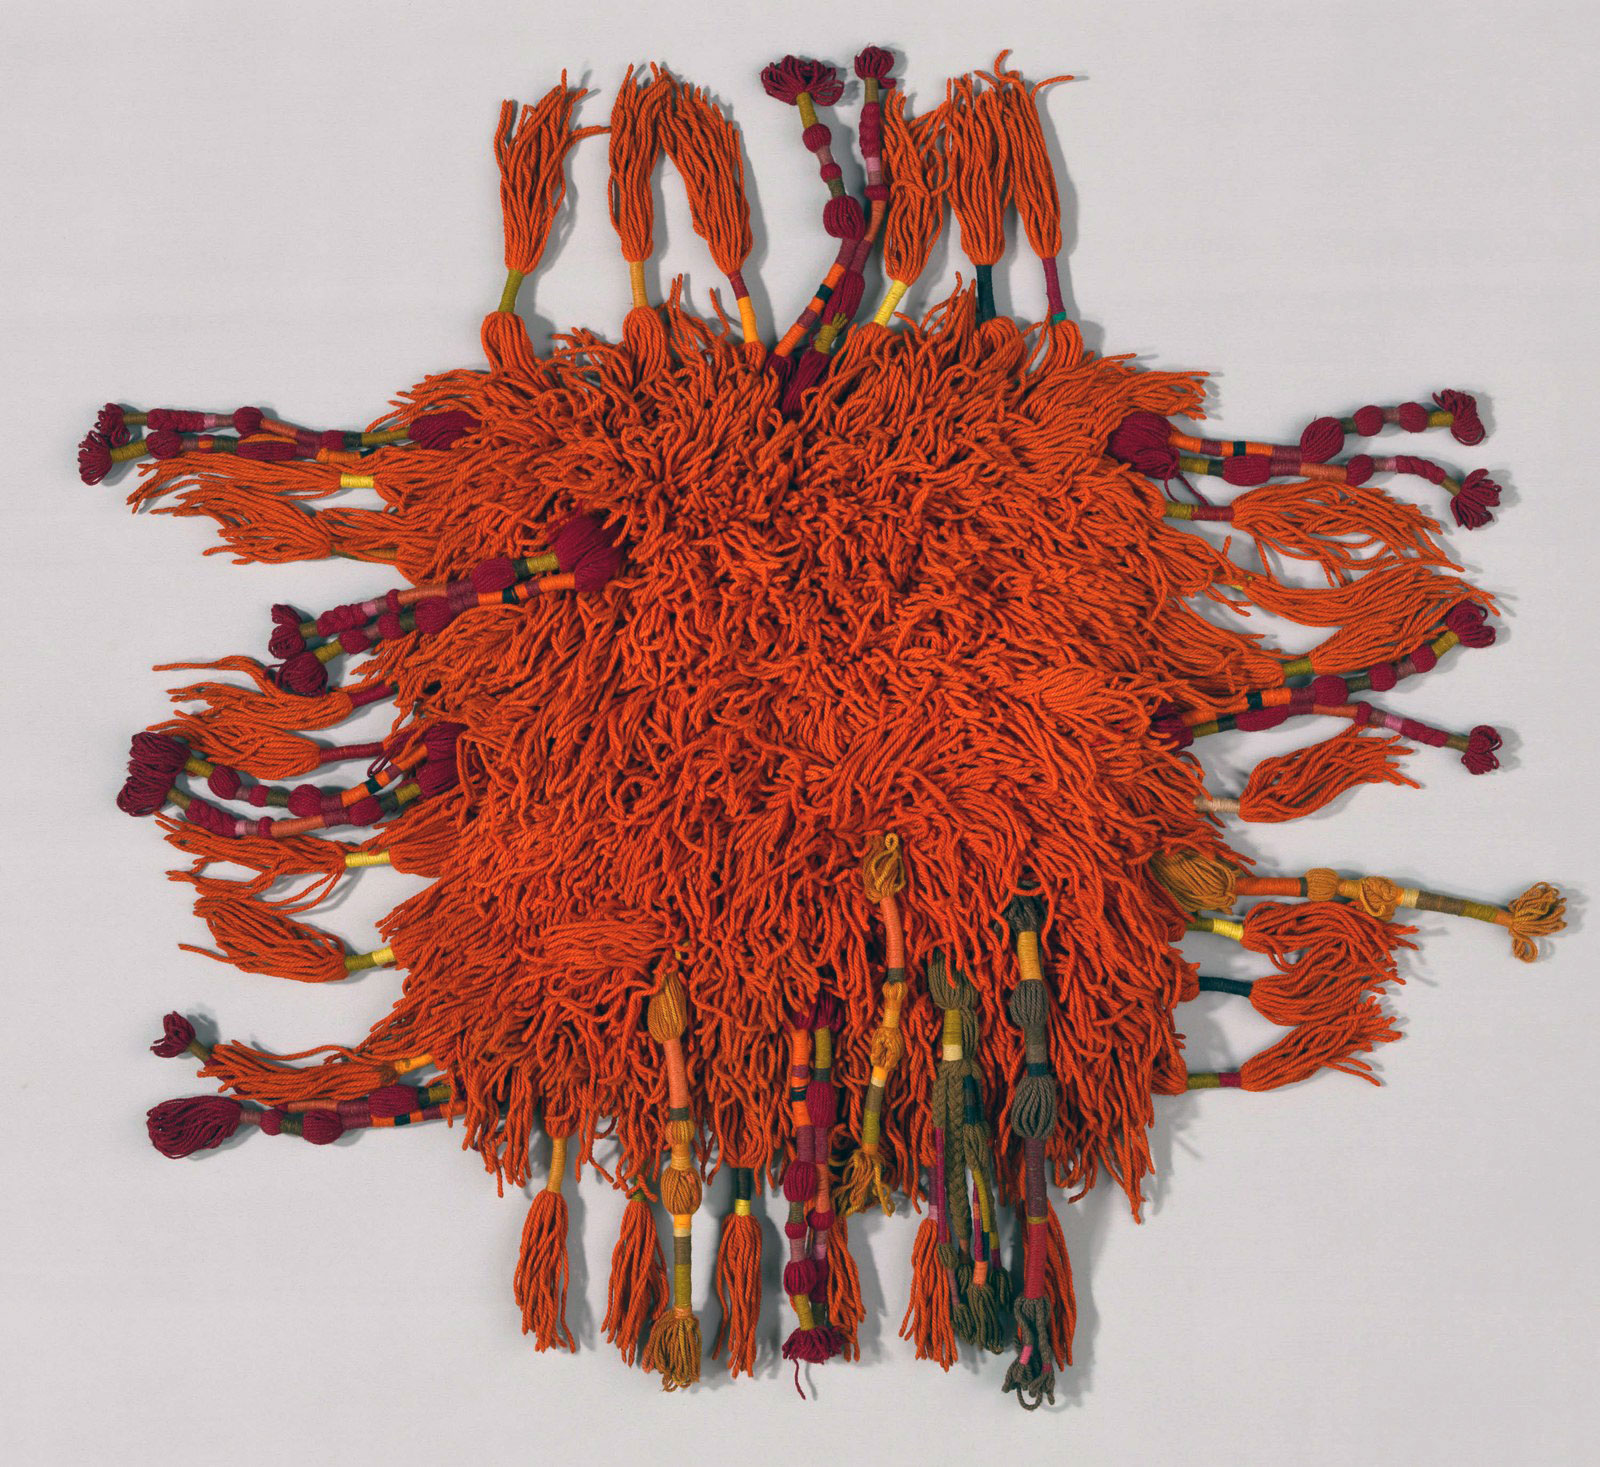 Sheila Hicks, Produced by V’SOSKE. Rug, about 1965. Gift of Sheila Hicks.